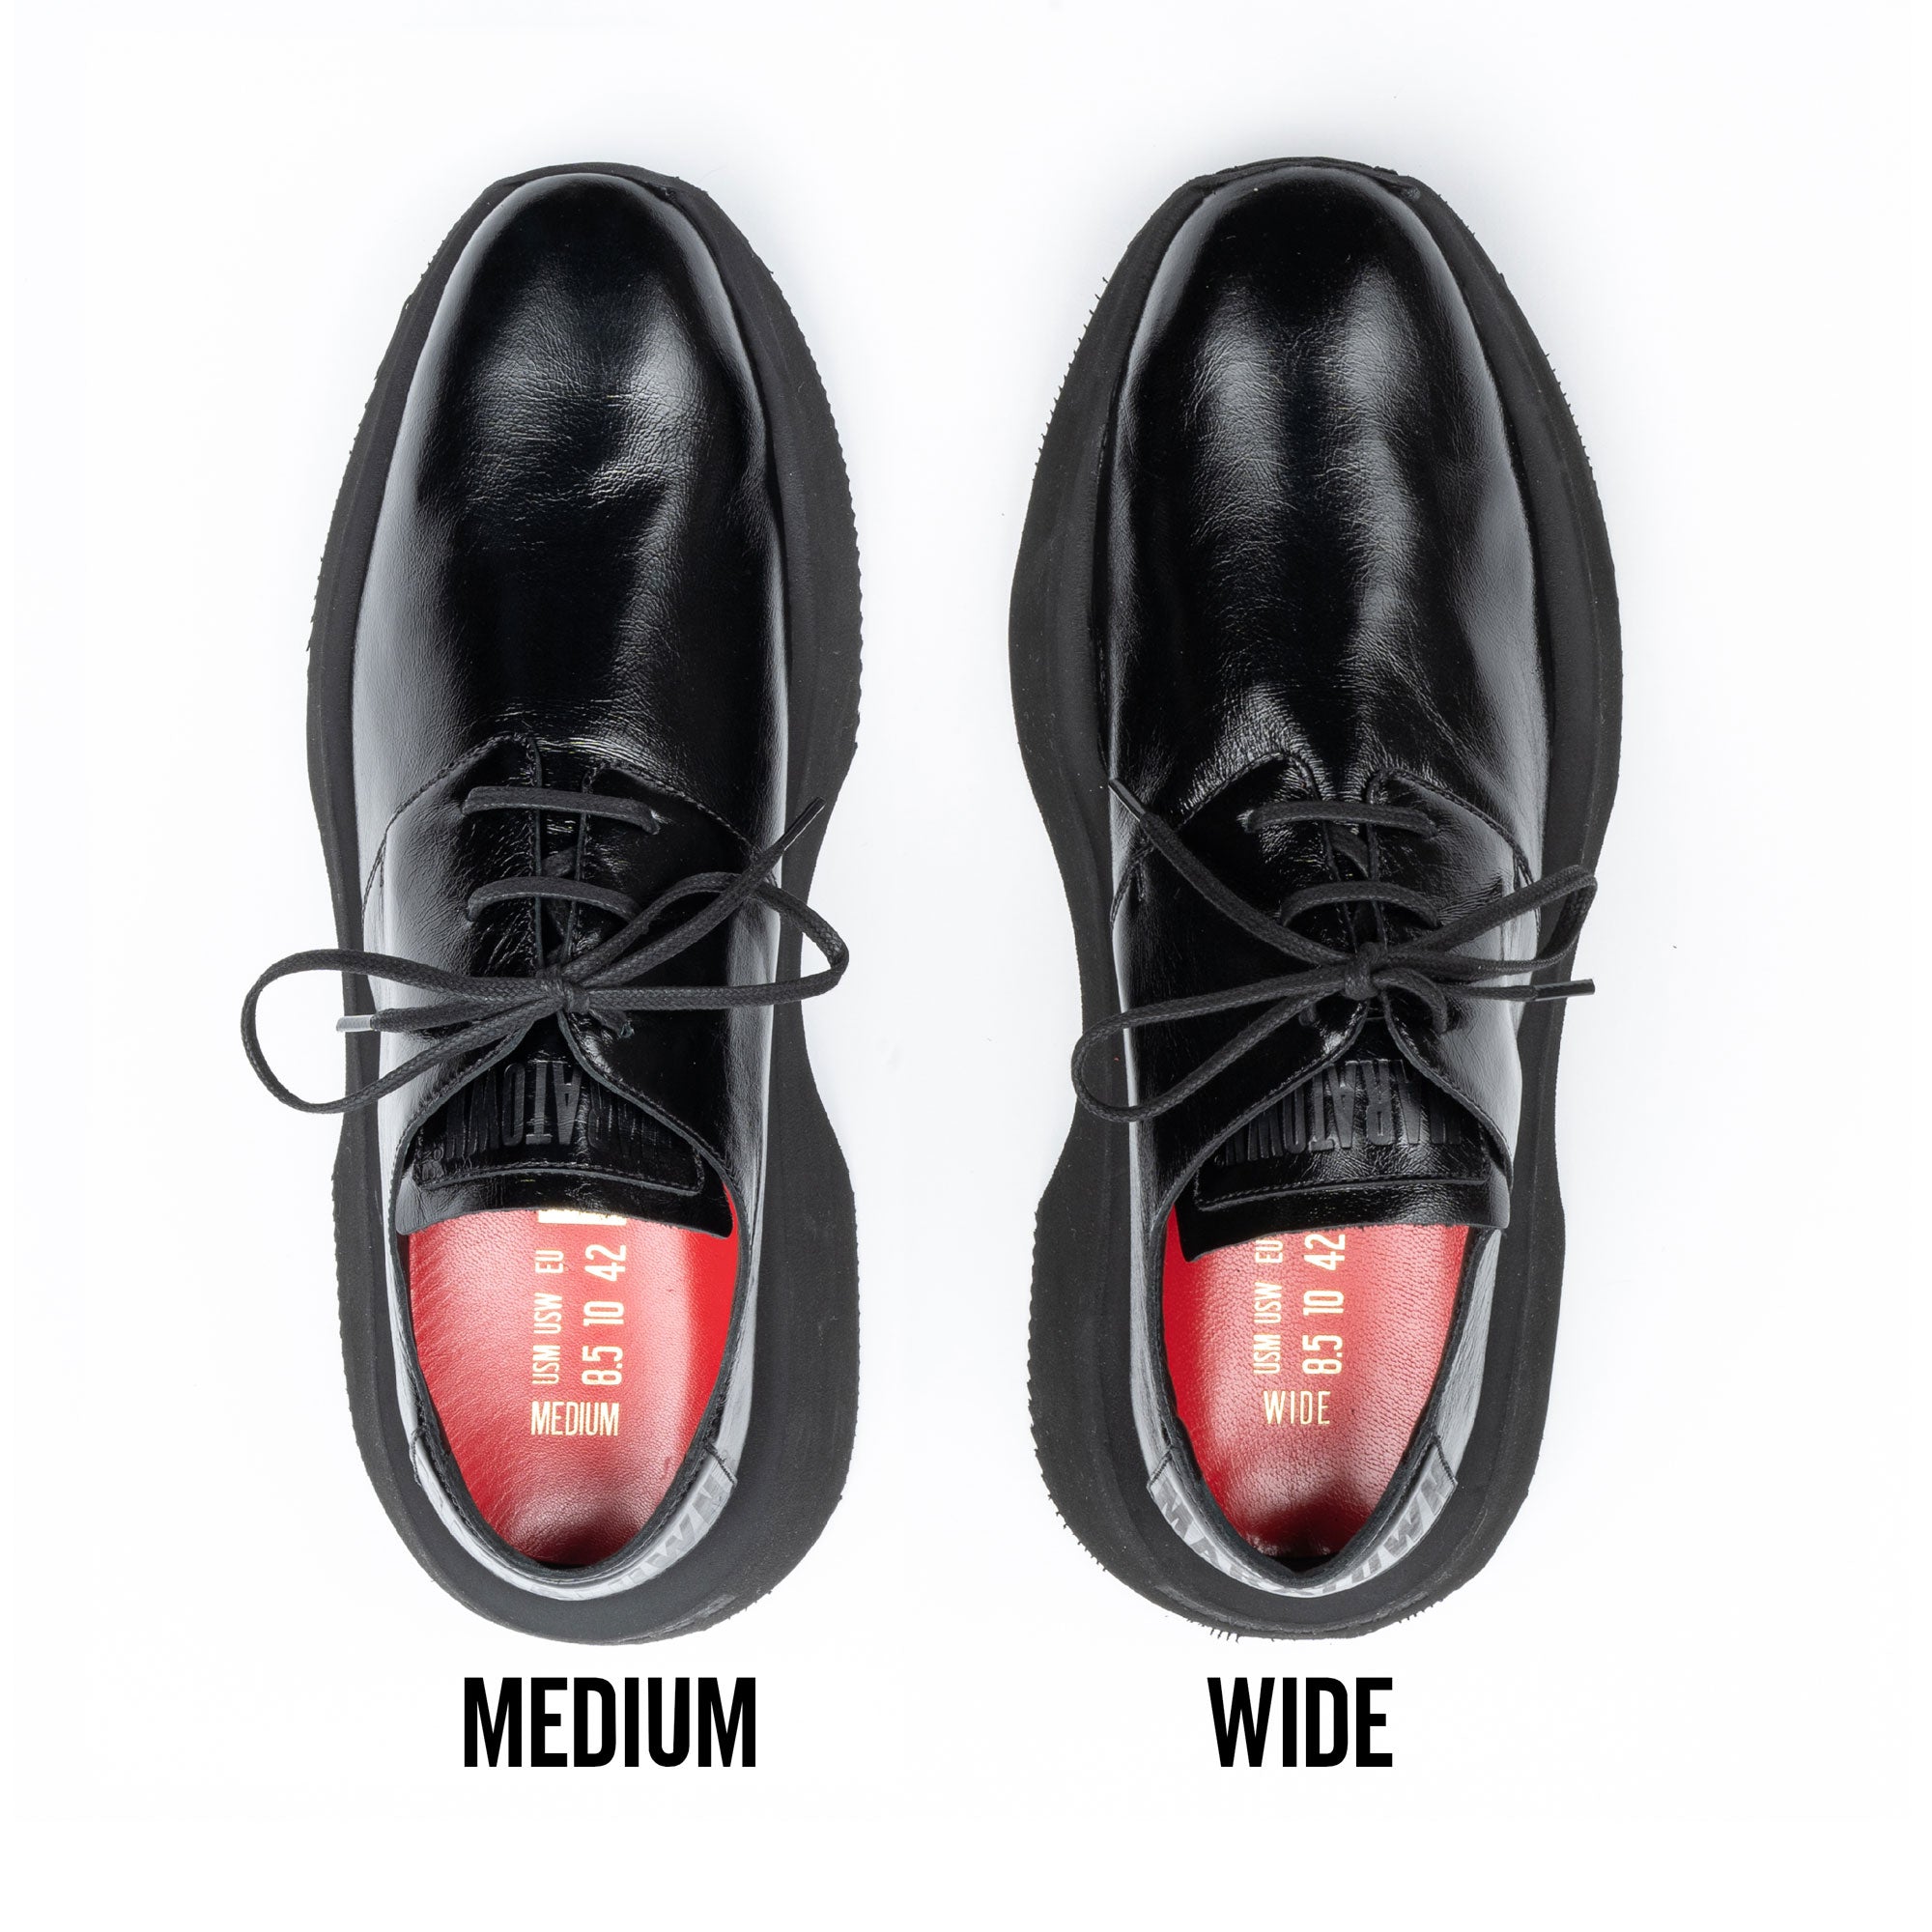 maratown Available in medium and wide fit, with extra-wide fit coming soon. A pair of volume adjusters comes in each box. The soft leather will stretch around your feet.